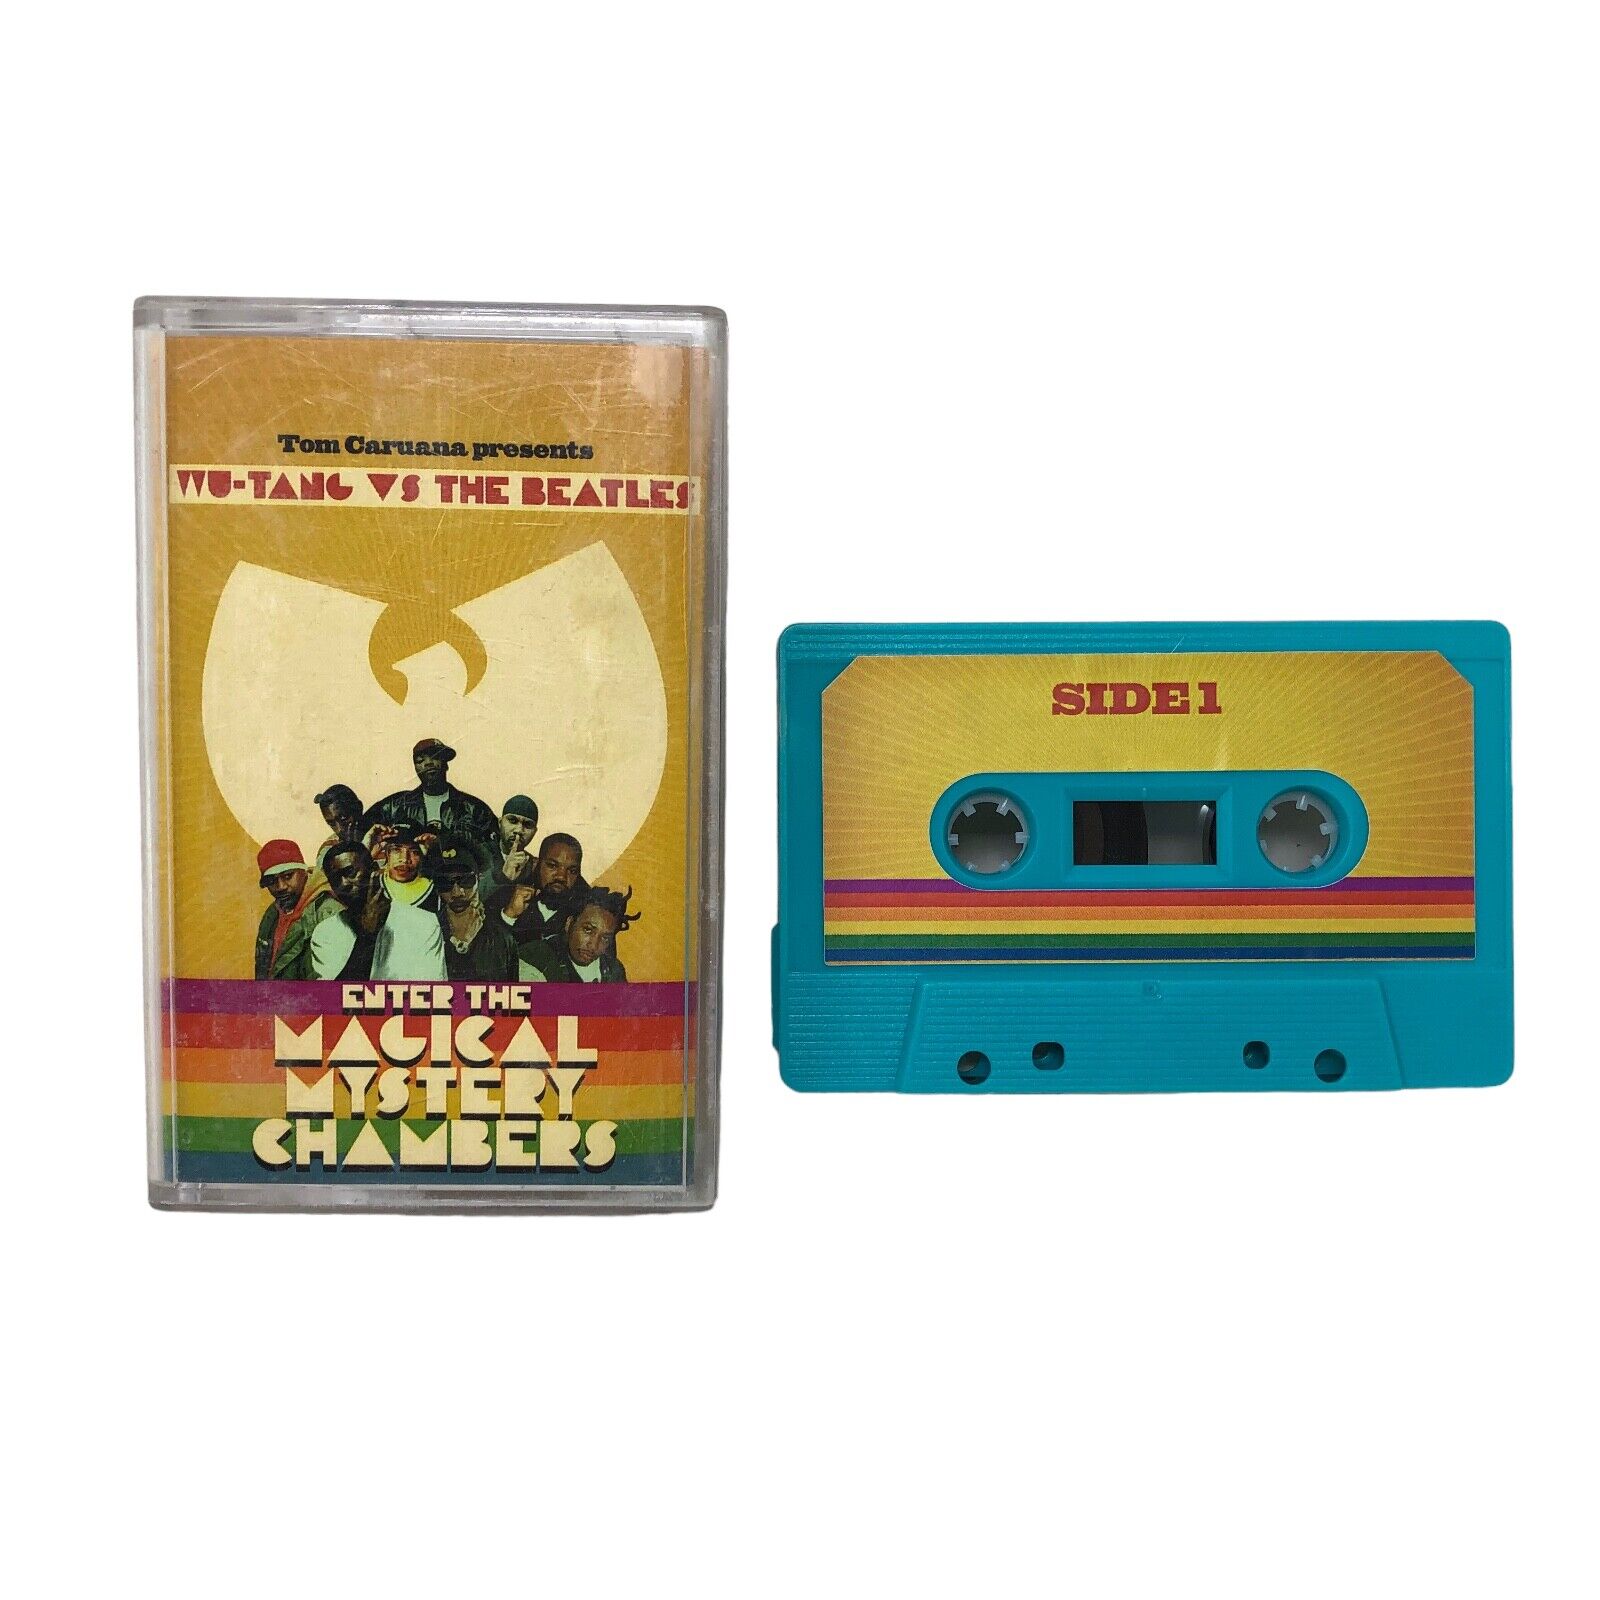 Wu-Tang Vs The Beatles Enter The Magical Mystery Chambers Cassette Tape